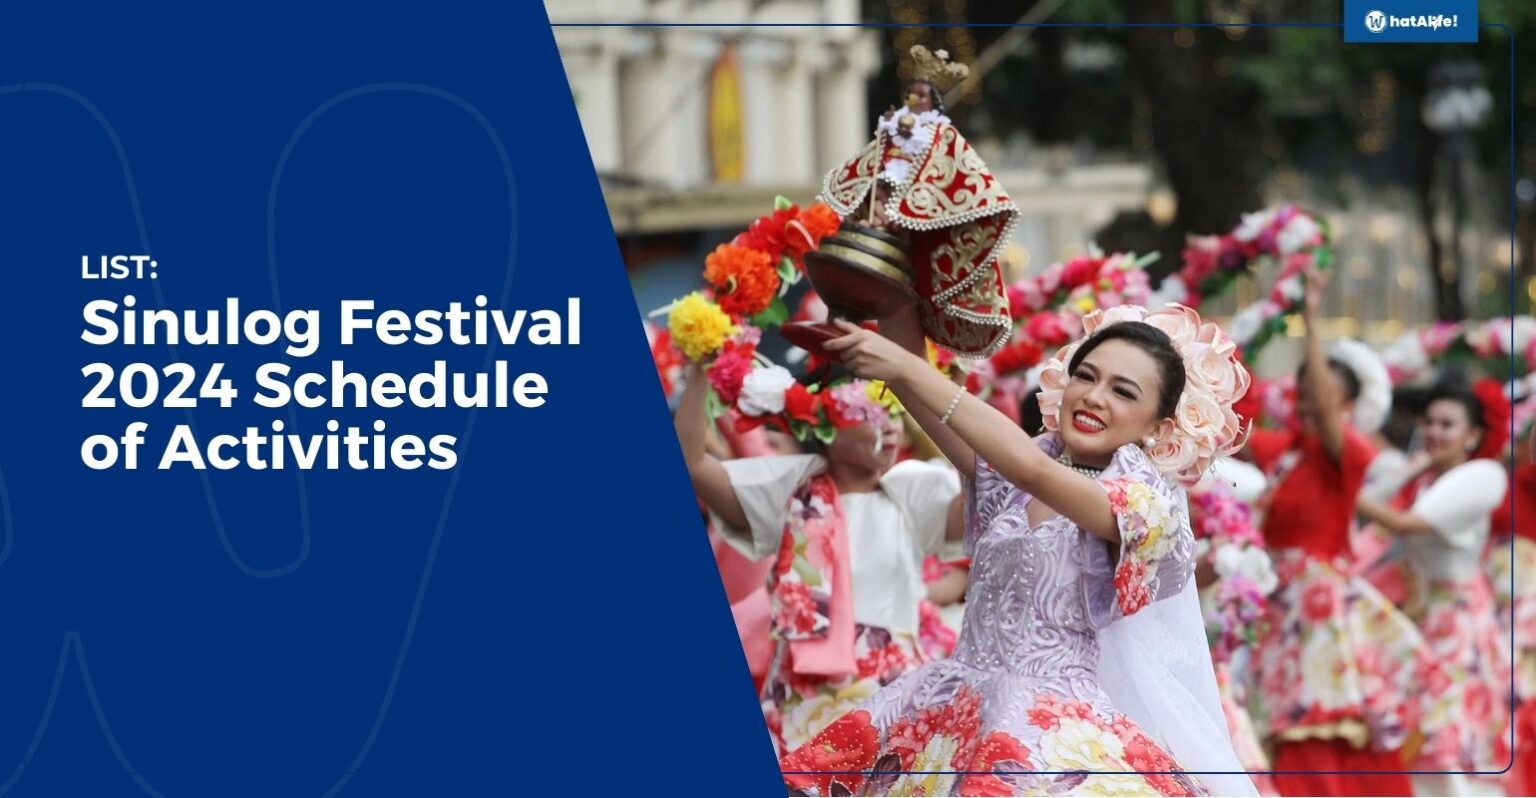 Sinulog Festival 2024 Schedule of Activities WhatALife!